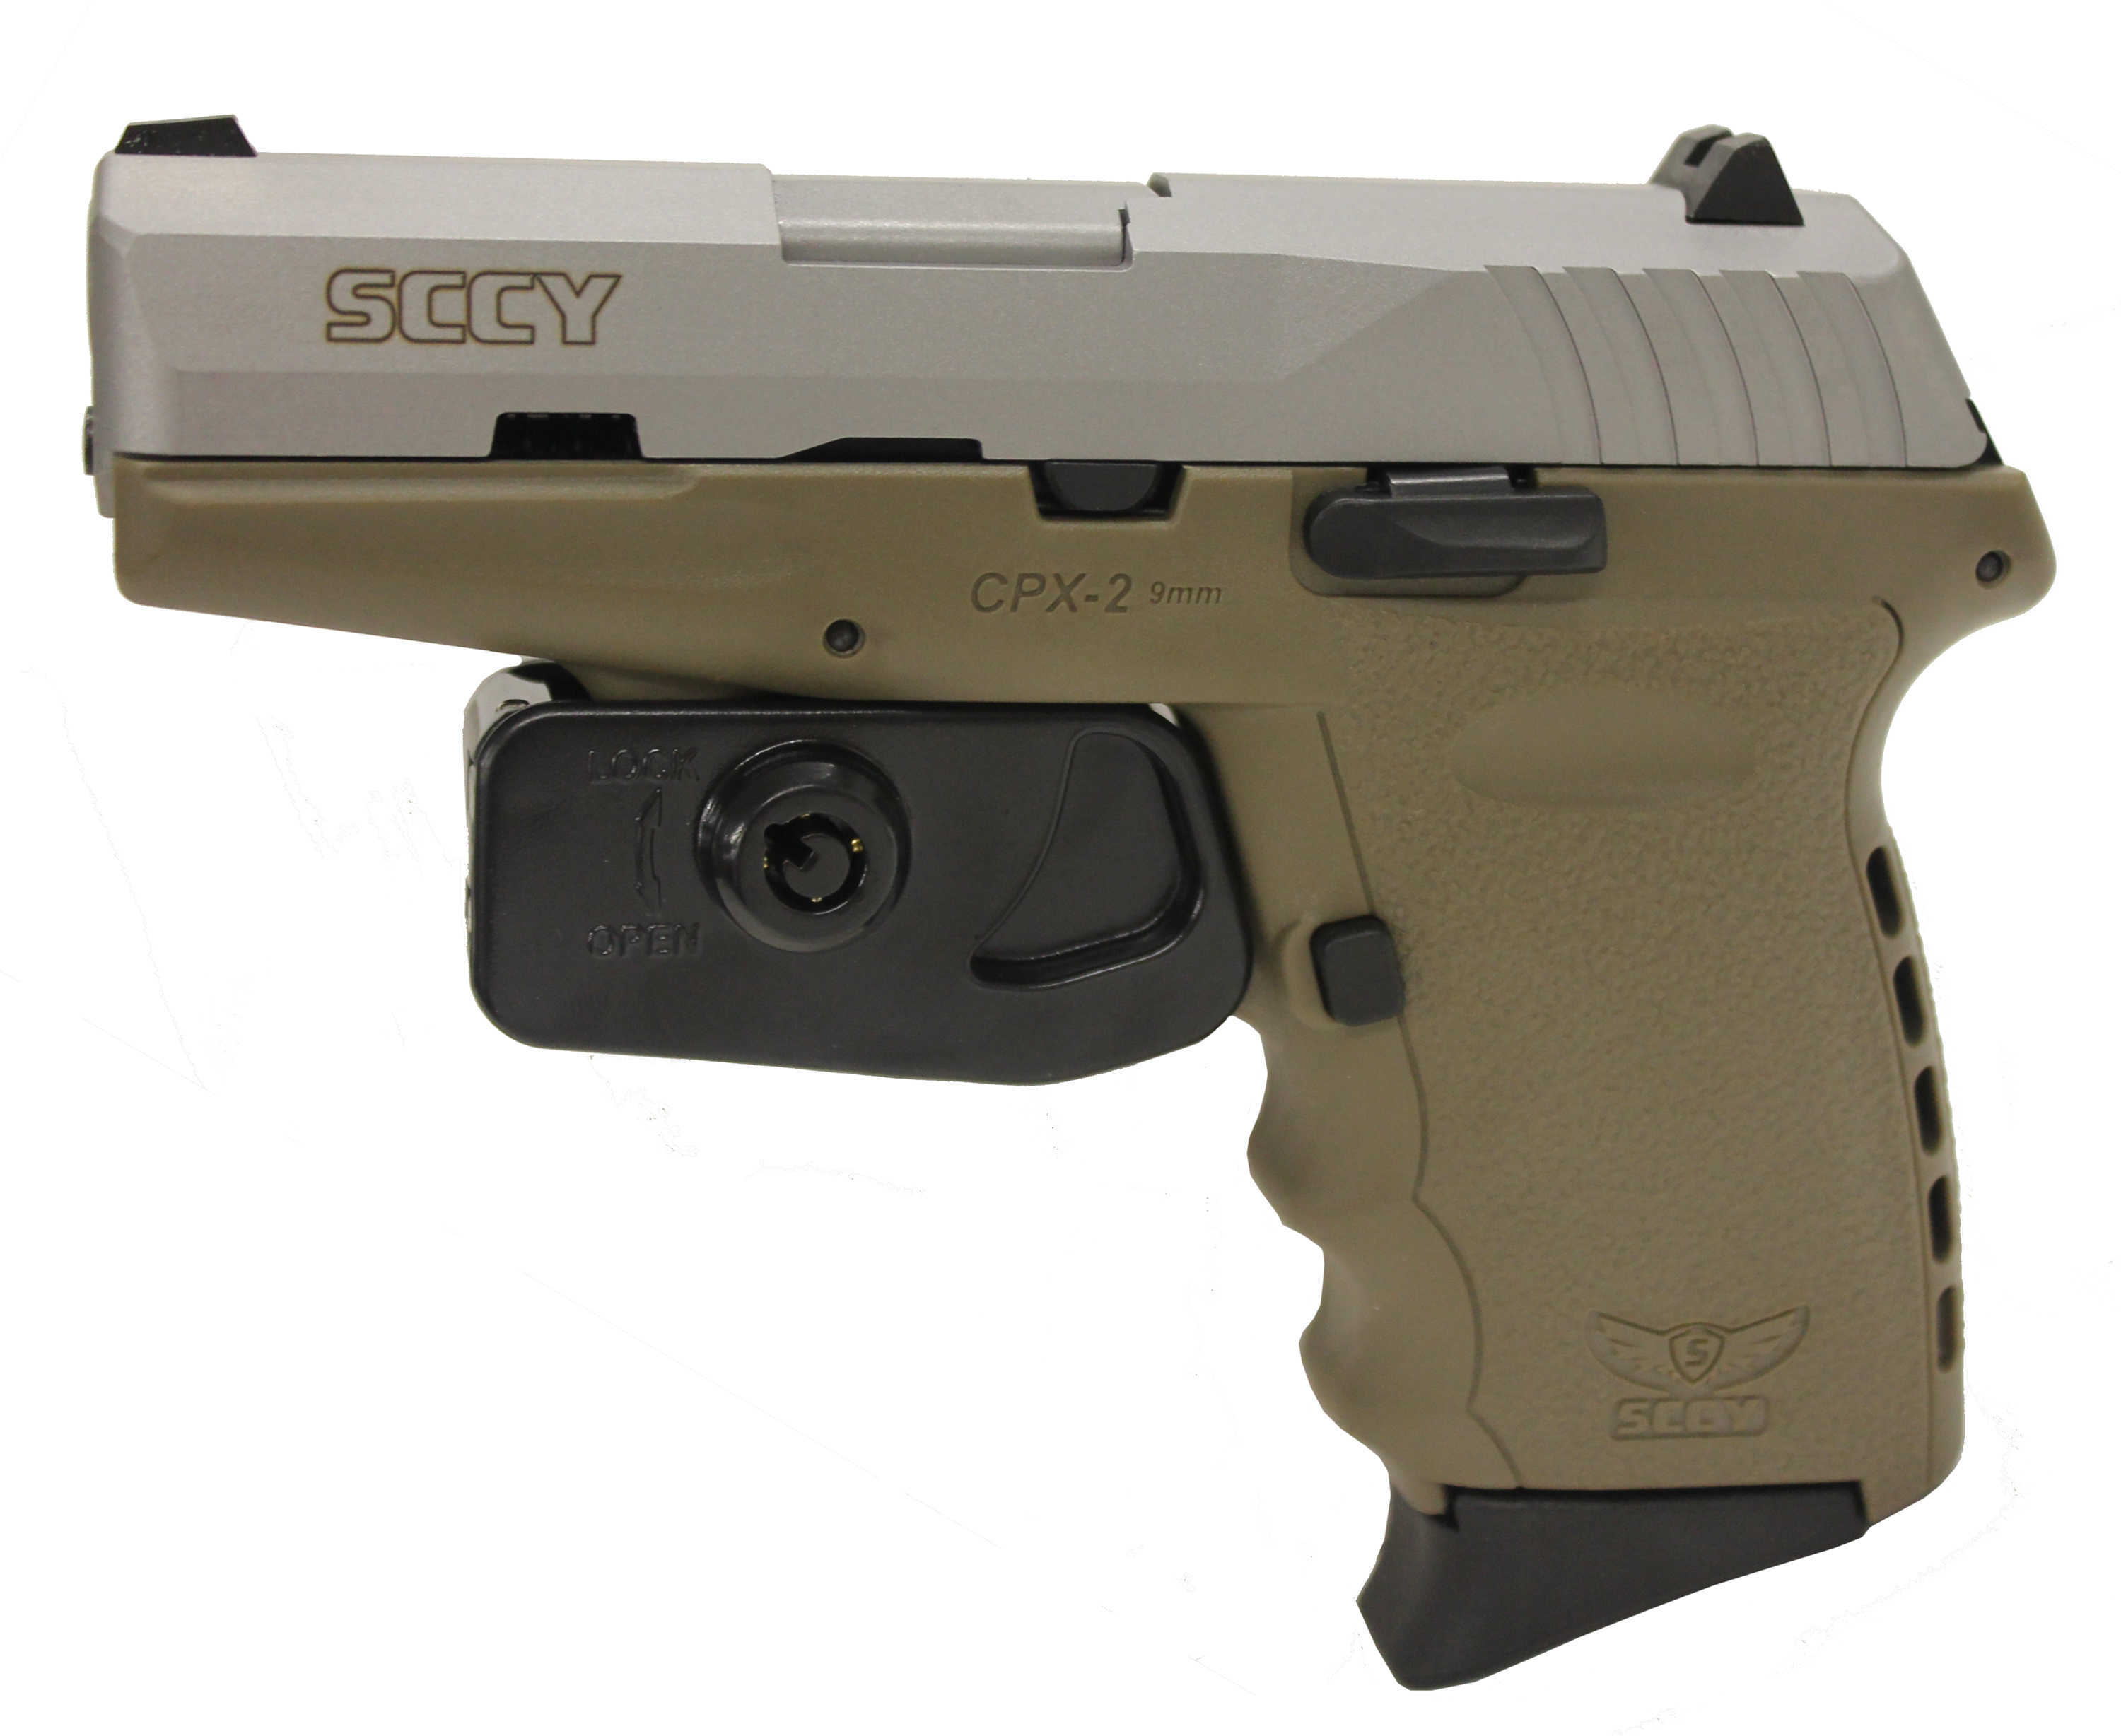 SCCY CPX-2 Pistol 9mm Luger 3.1" Barrel 10 Round Flat Dark Earth 2 Magazines TTDE